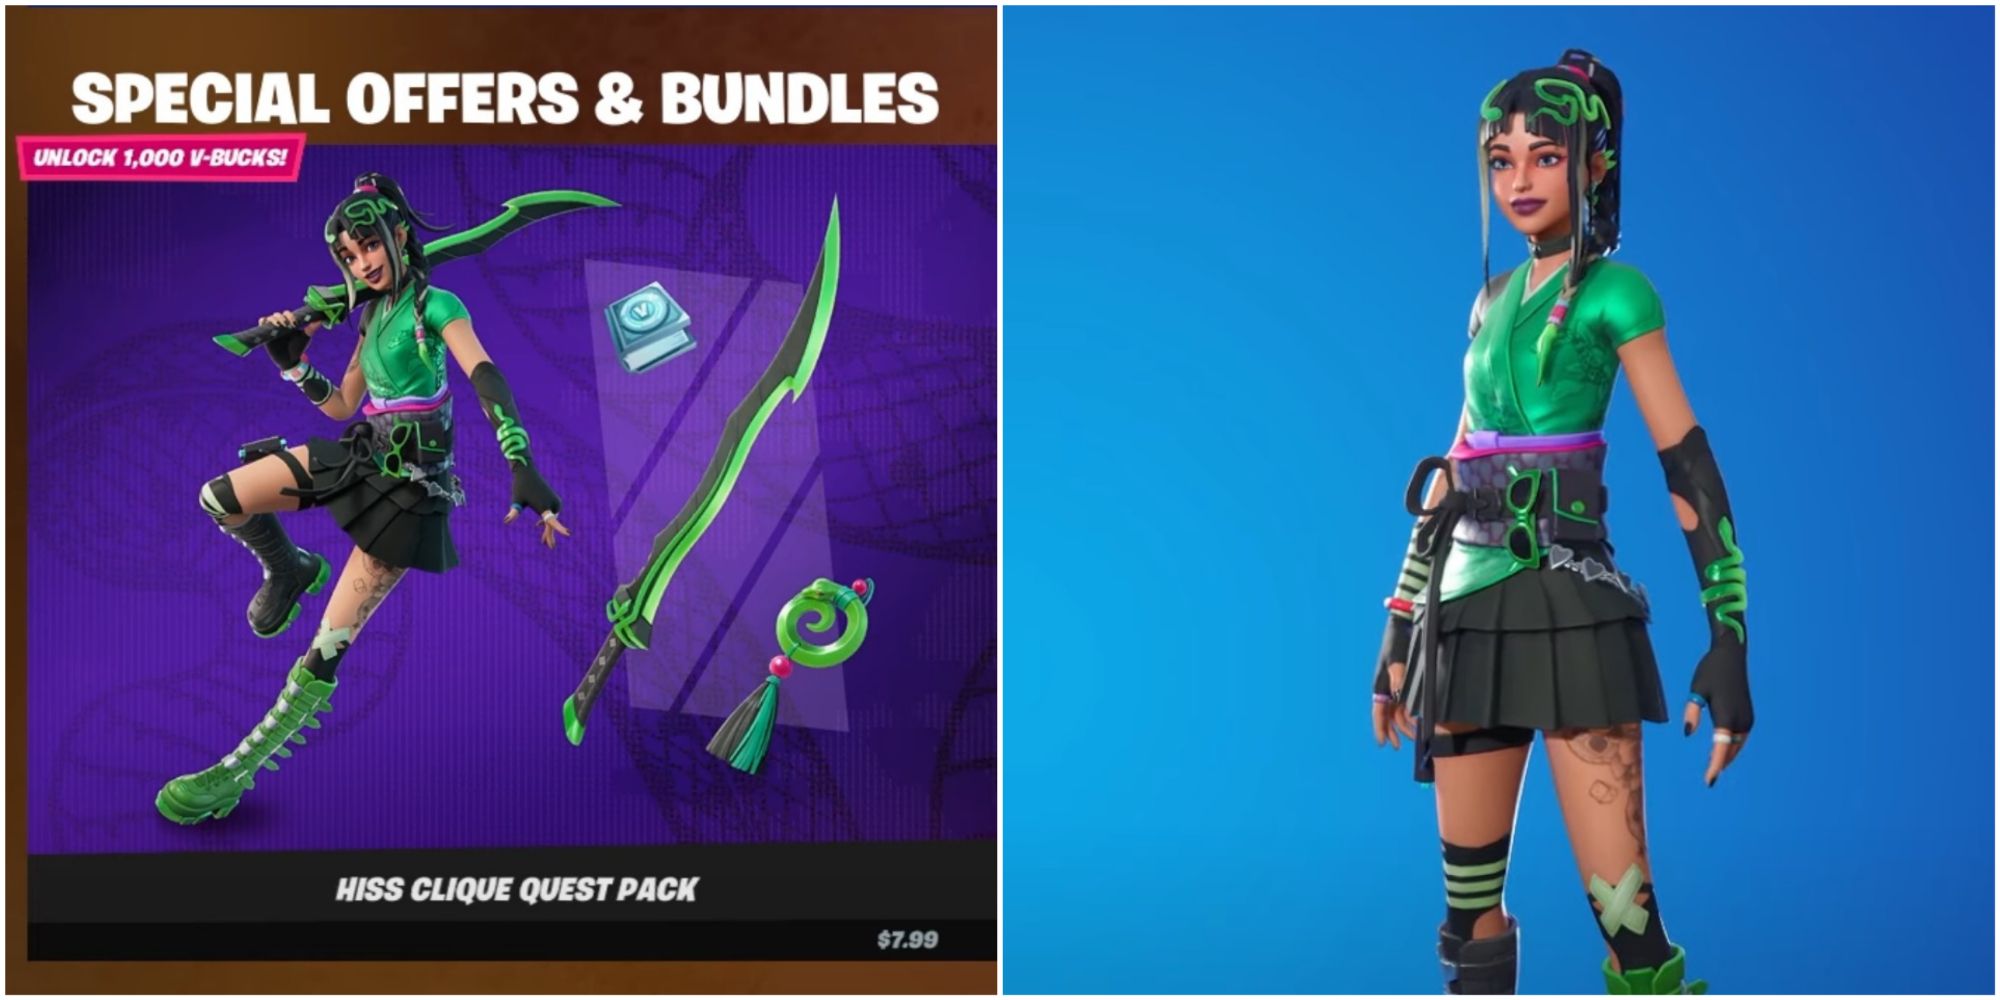 Fortnite: Full Clip Pack adds in tons of goodies and V-Bucks